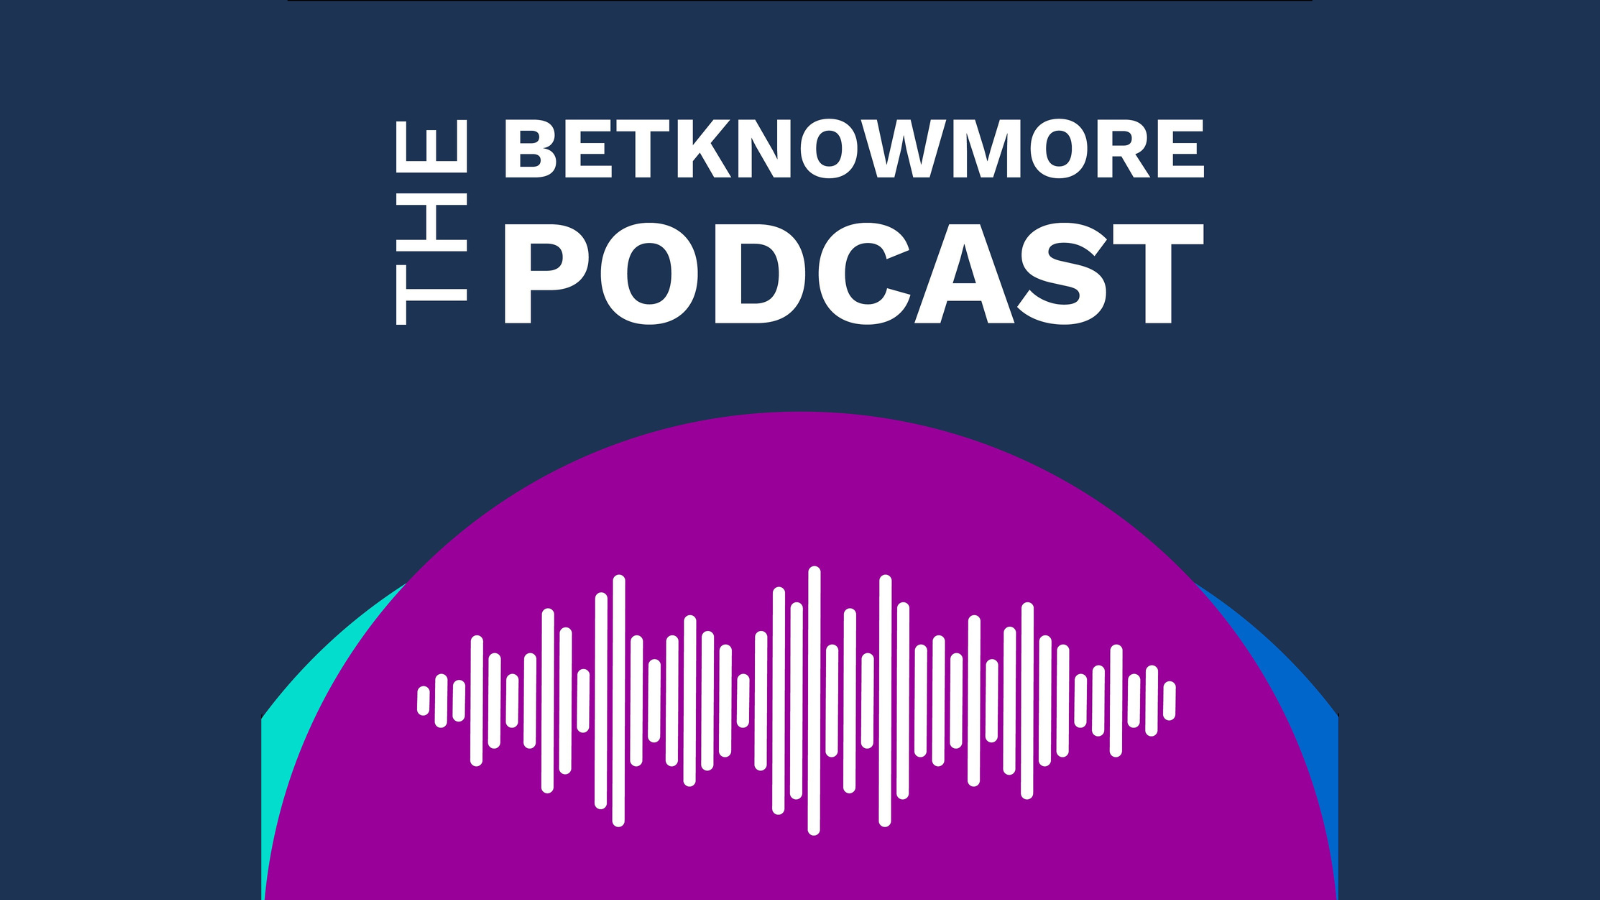 Podcast: Colin Walsh speaks with Betknowmore - GamCare